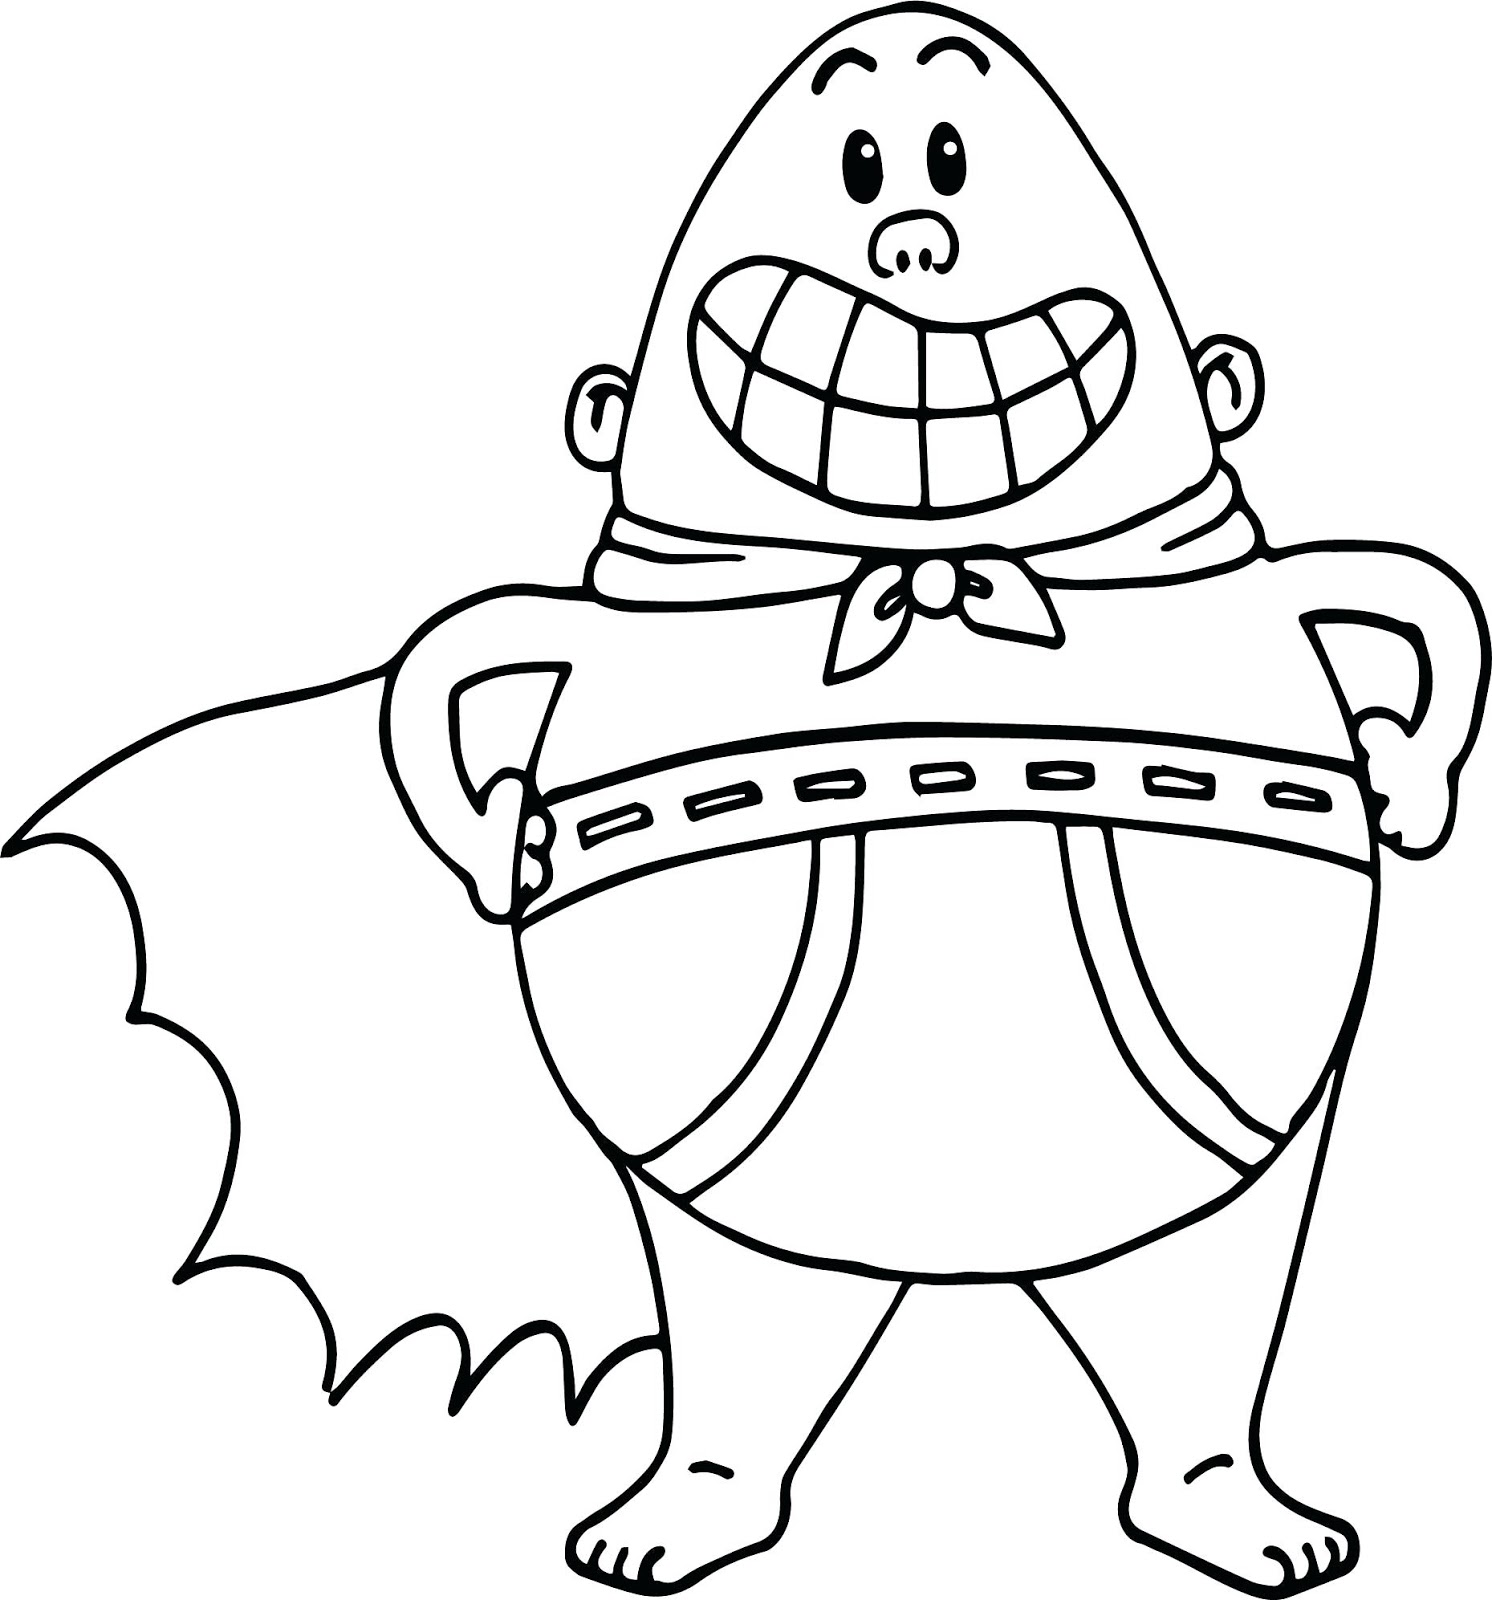 captain-underpants-coloring-page-free-printable-coloring-pages-for-kids